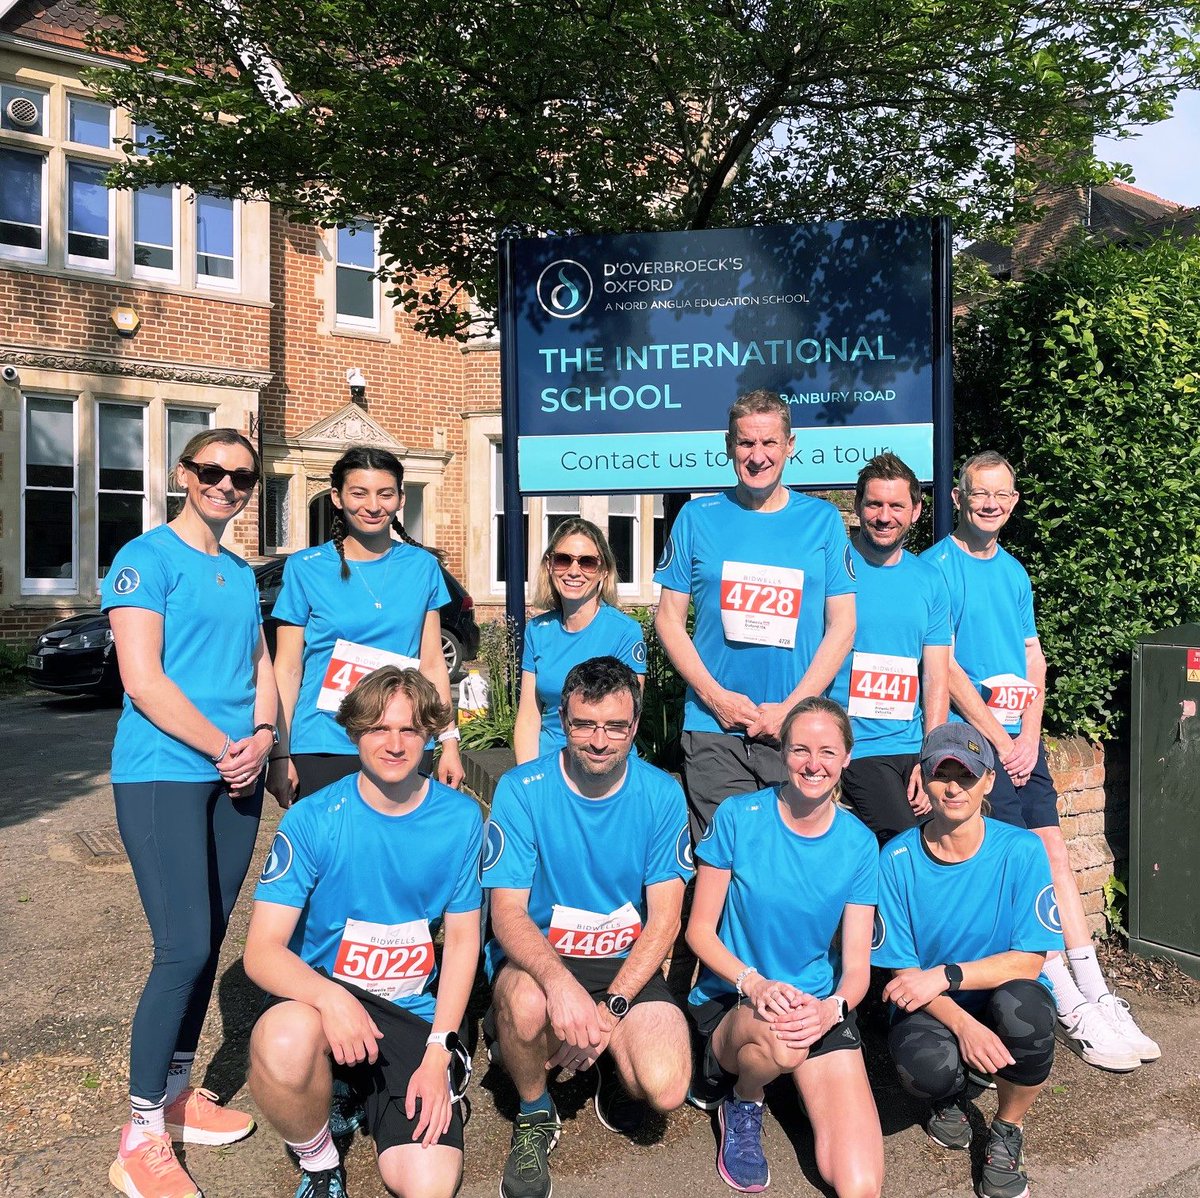 10k for a good cause! Our school staff rocked the @TownandGown10k fun run on Sunday. Well done! 🏃‍♂️🏅